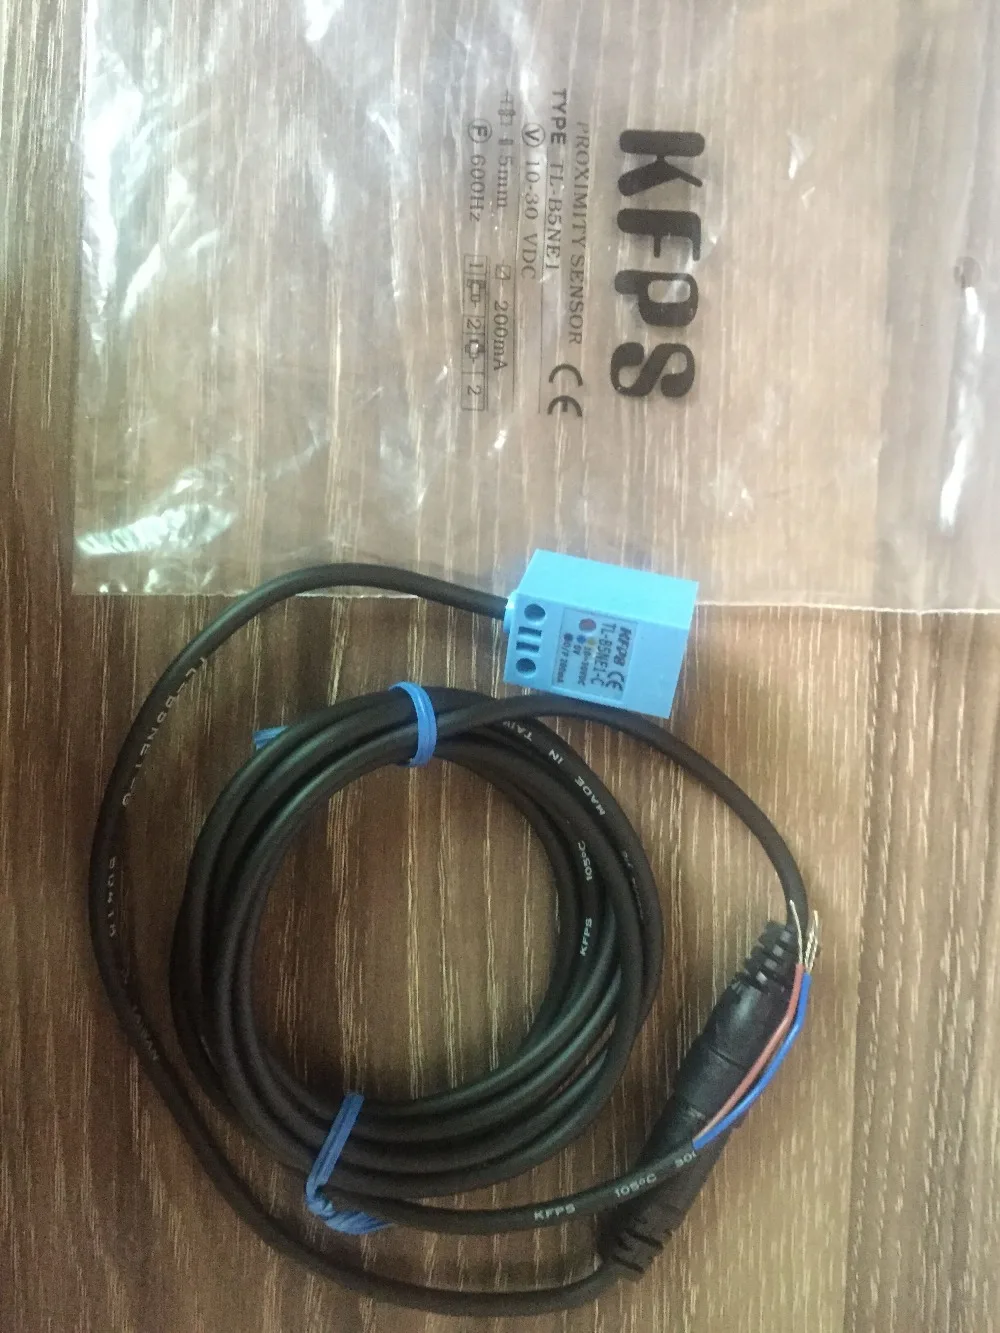 Details about   1pcs new KFPS proximity switch TL-36-5NSE1 